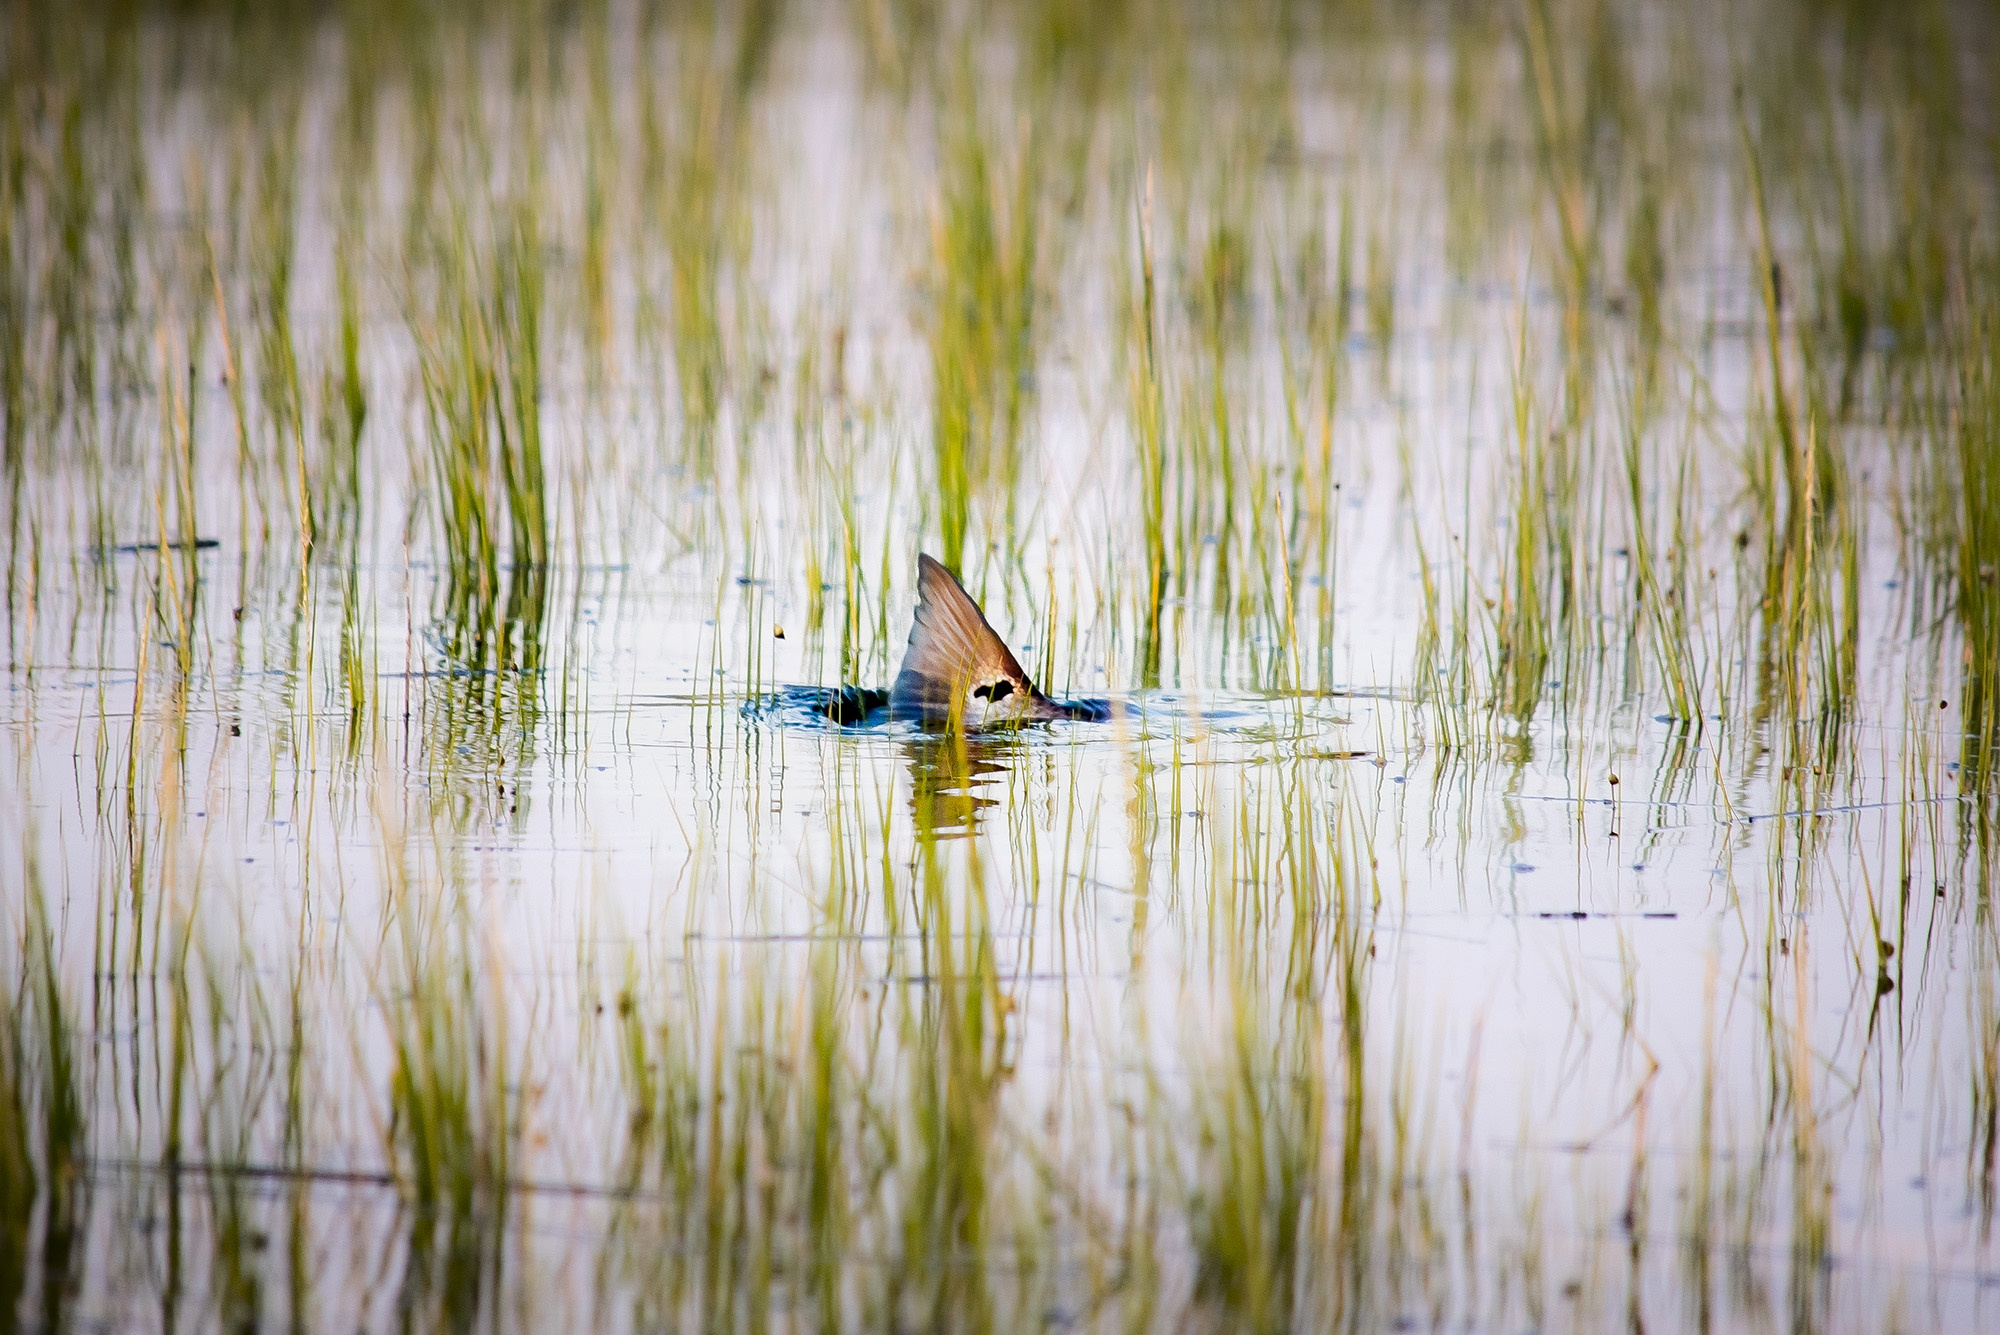 A tailing Redfish poking out of the water among seagrasses